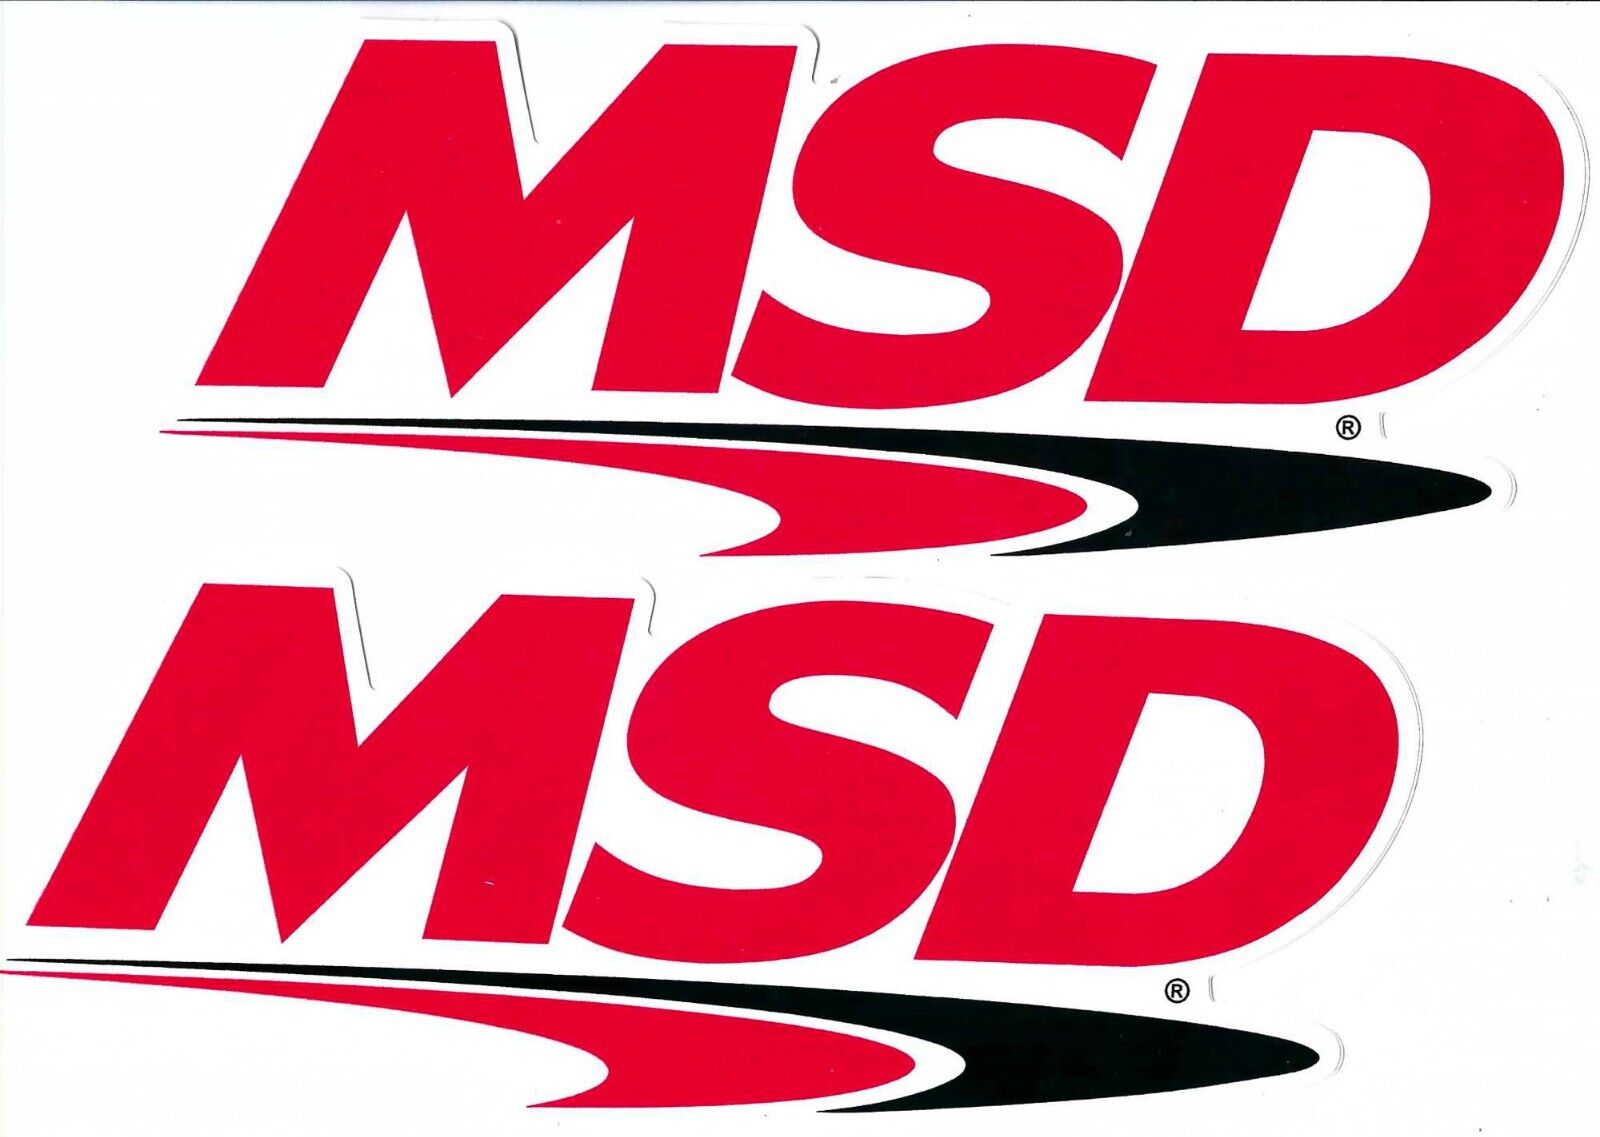 MSD Racing Decals Sticker Set of 2 Black White Vinyl 8 Inches Long